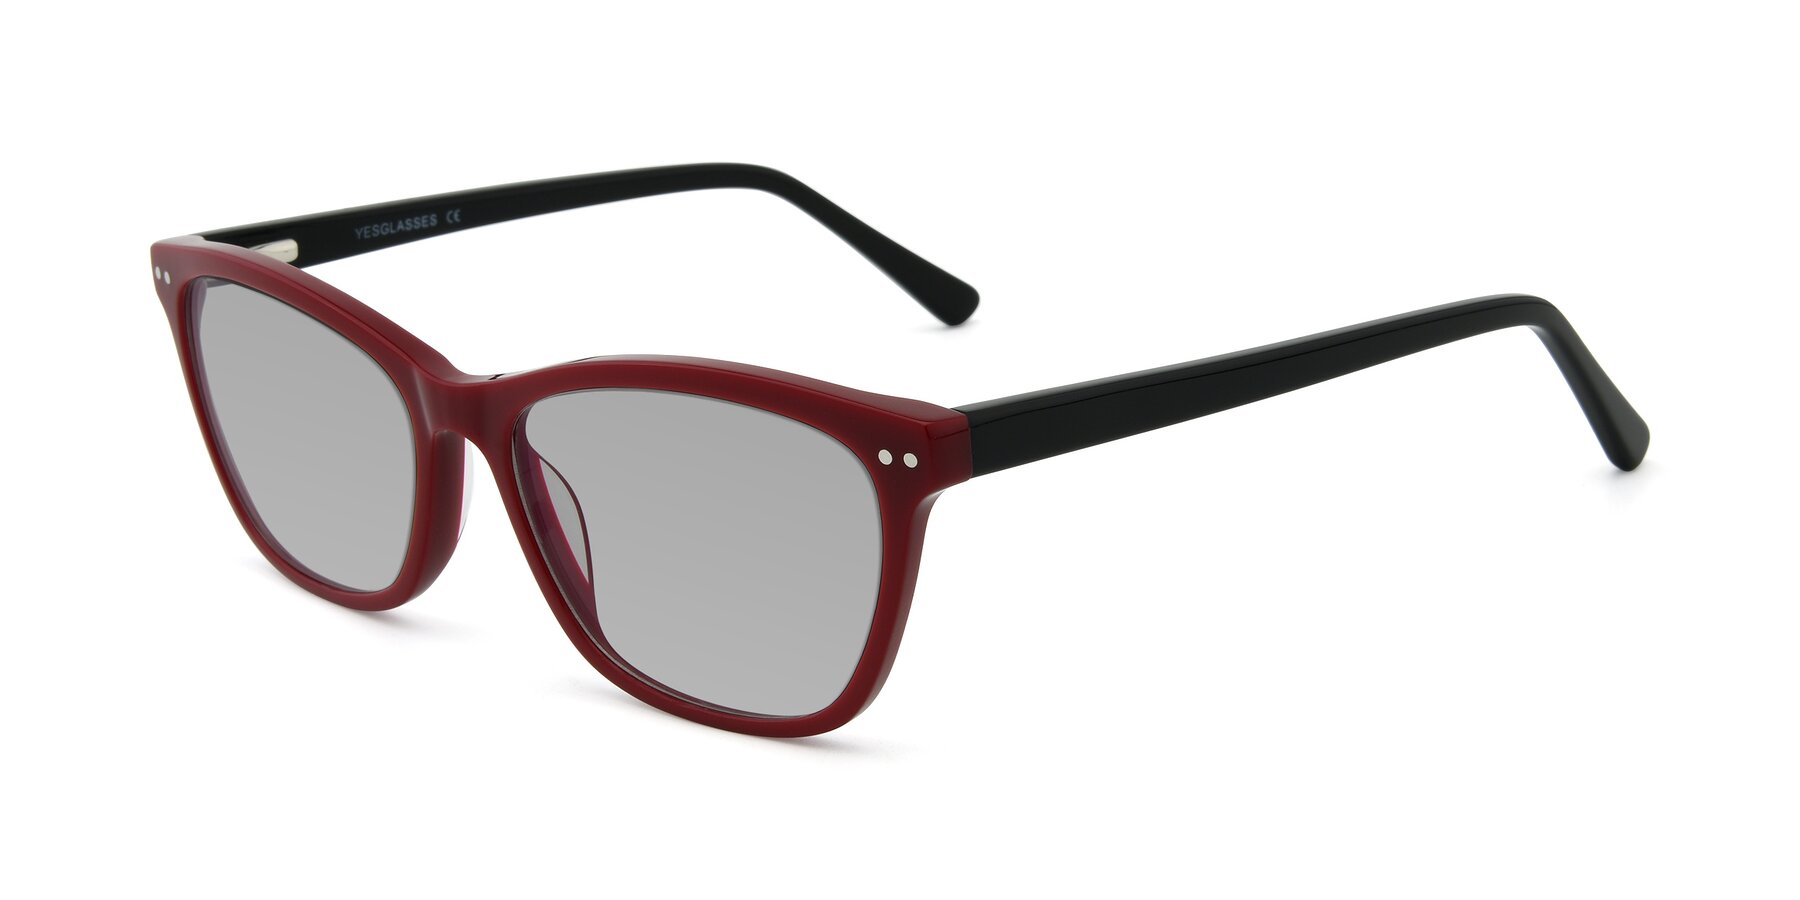 Angle of 17350 in Wine with Light Gray Tinted Lenses